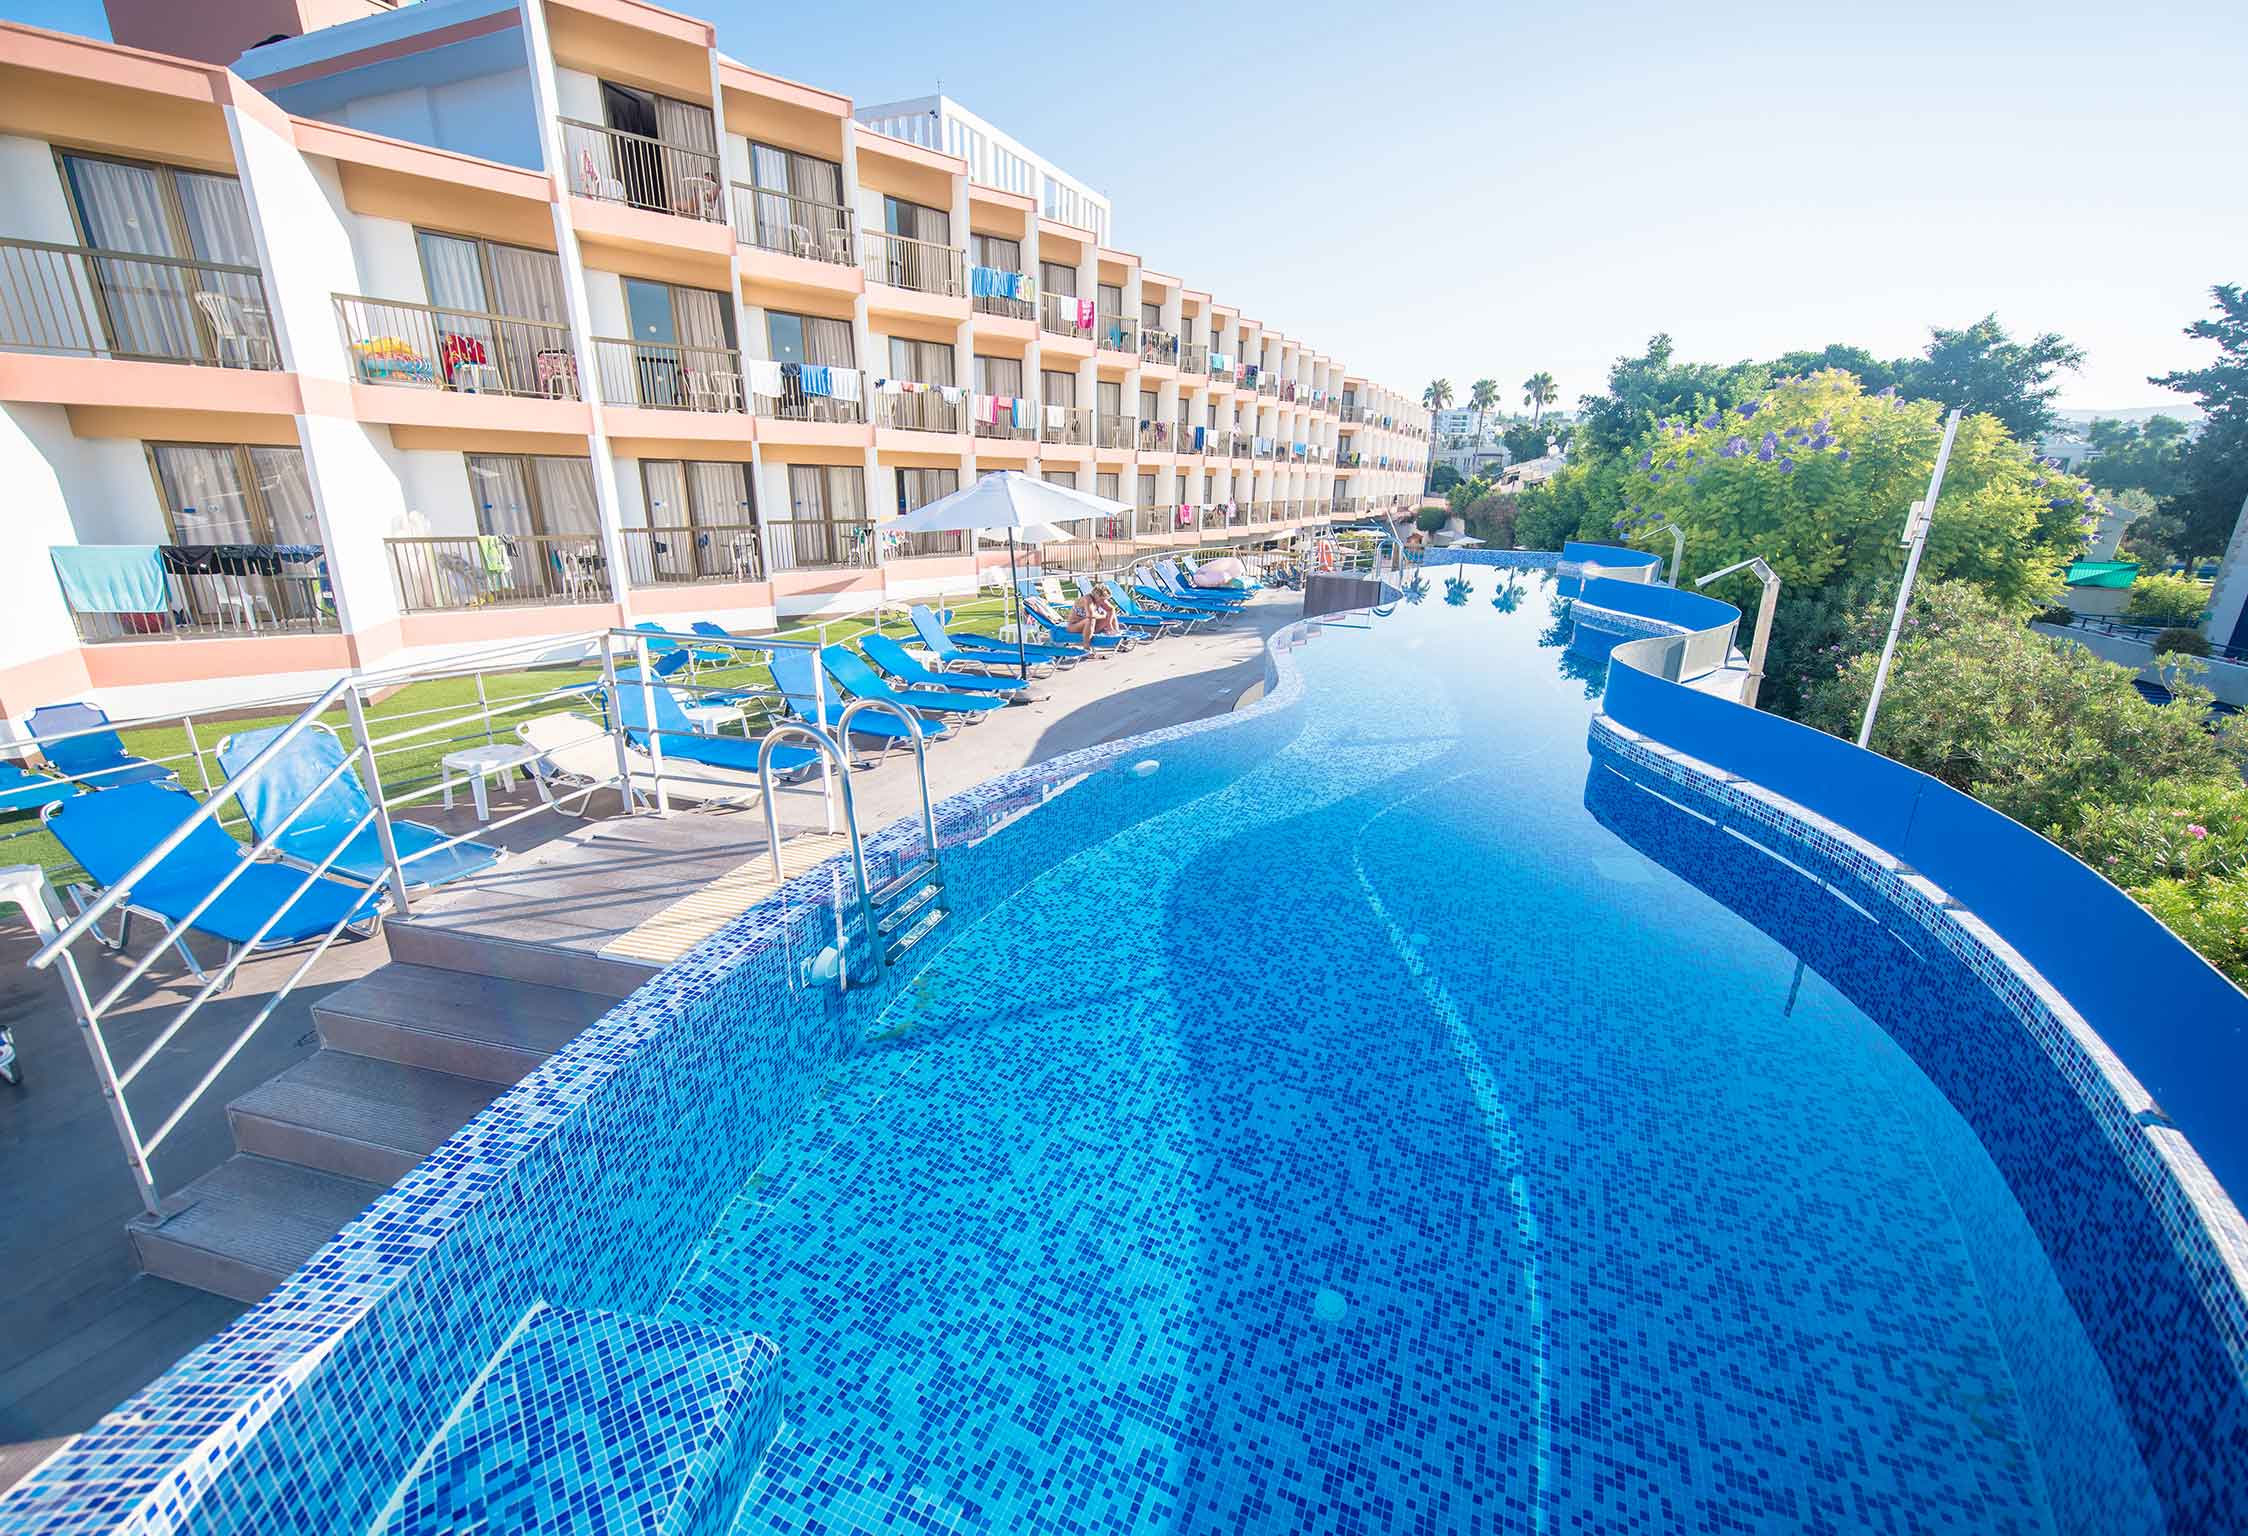 Avilda Hotel overlooking the sun loungers and swimming pool